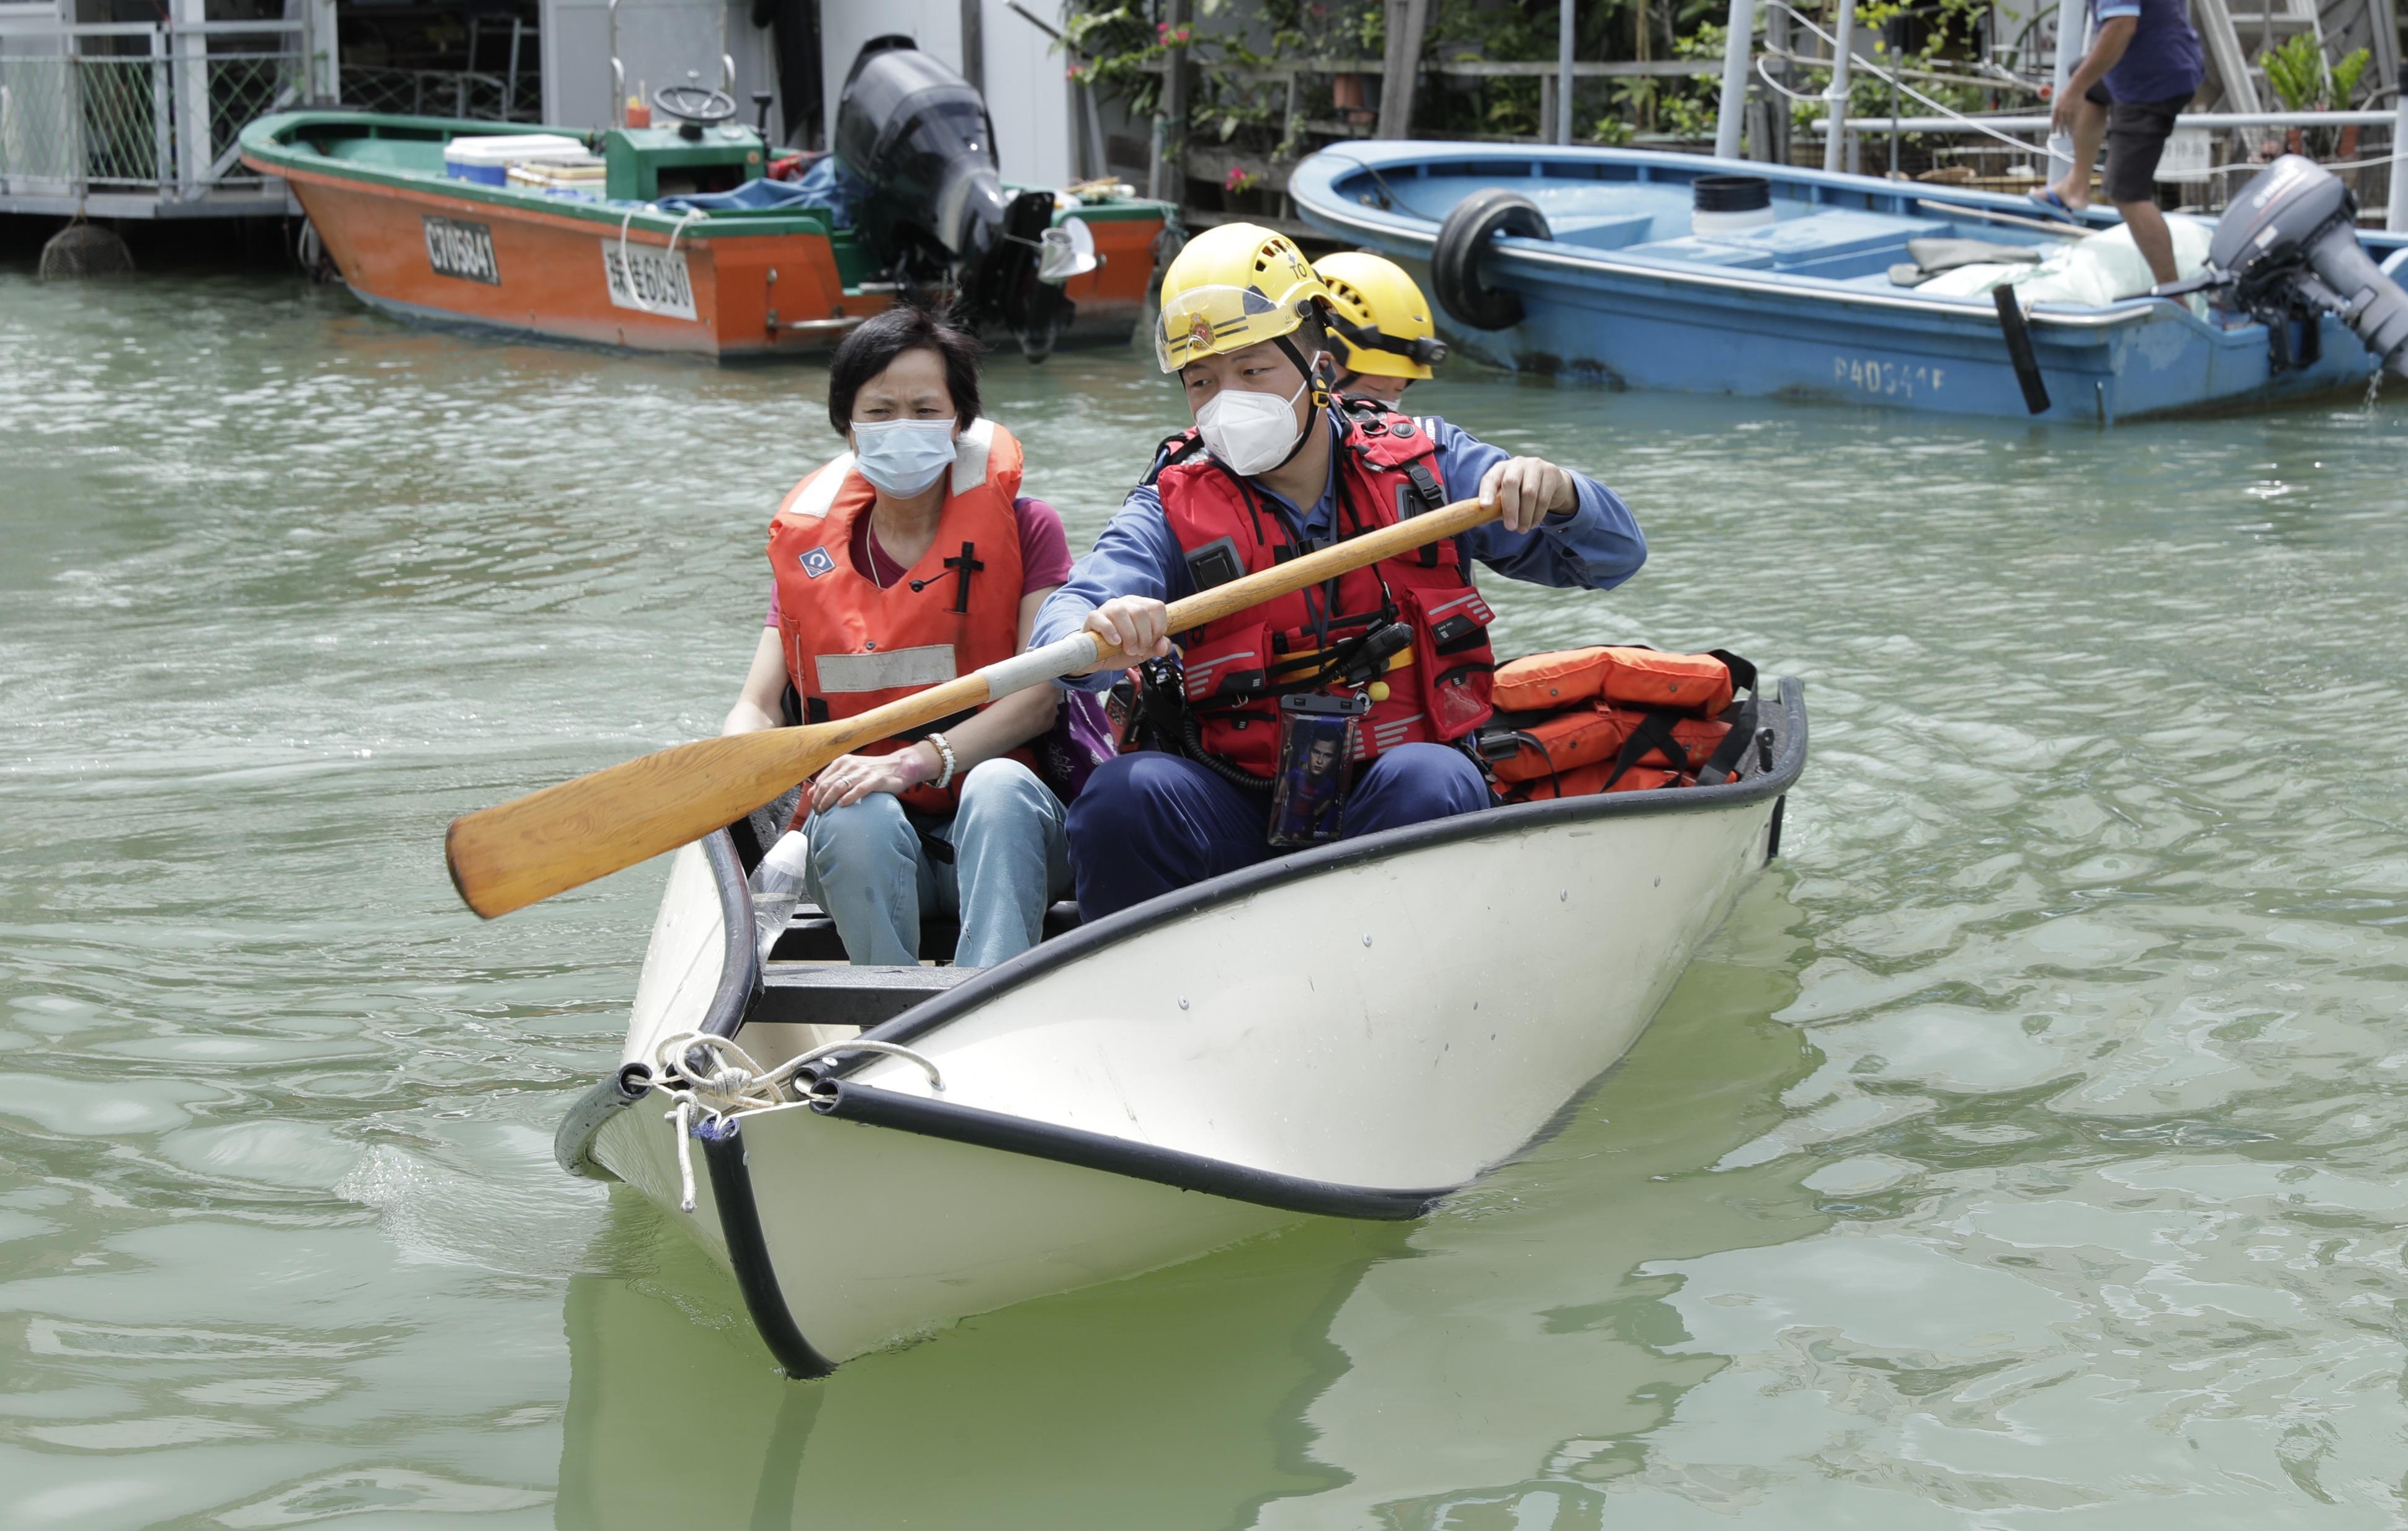 The Islands District Office conducted an inter-departmental rescue and evacuation drill on emergency response to flooding in Tai O today (June 16). Photo shows firemen rescuing a trapped resident during the drill.